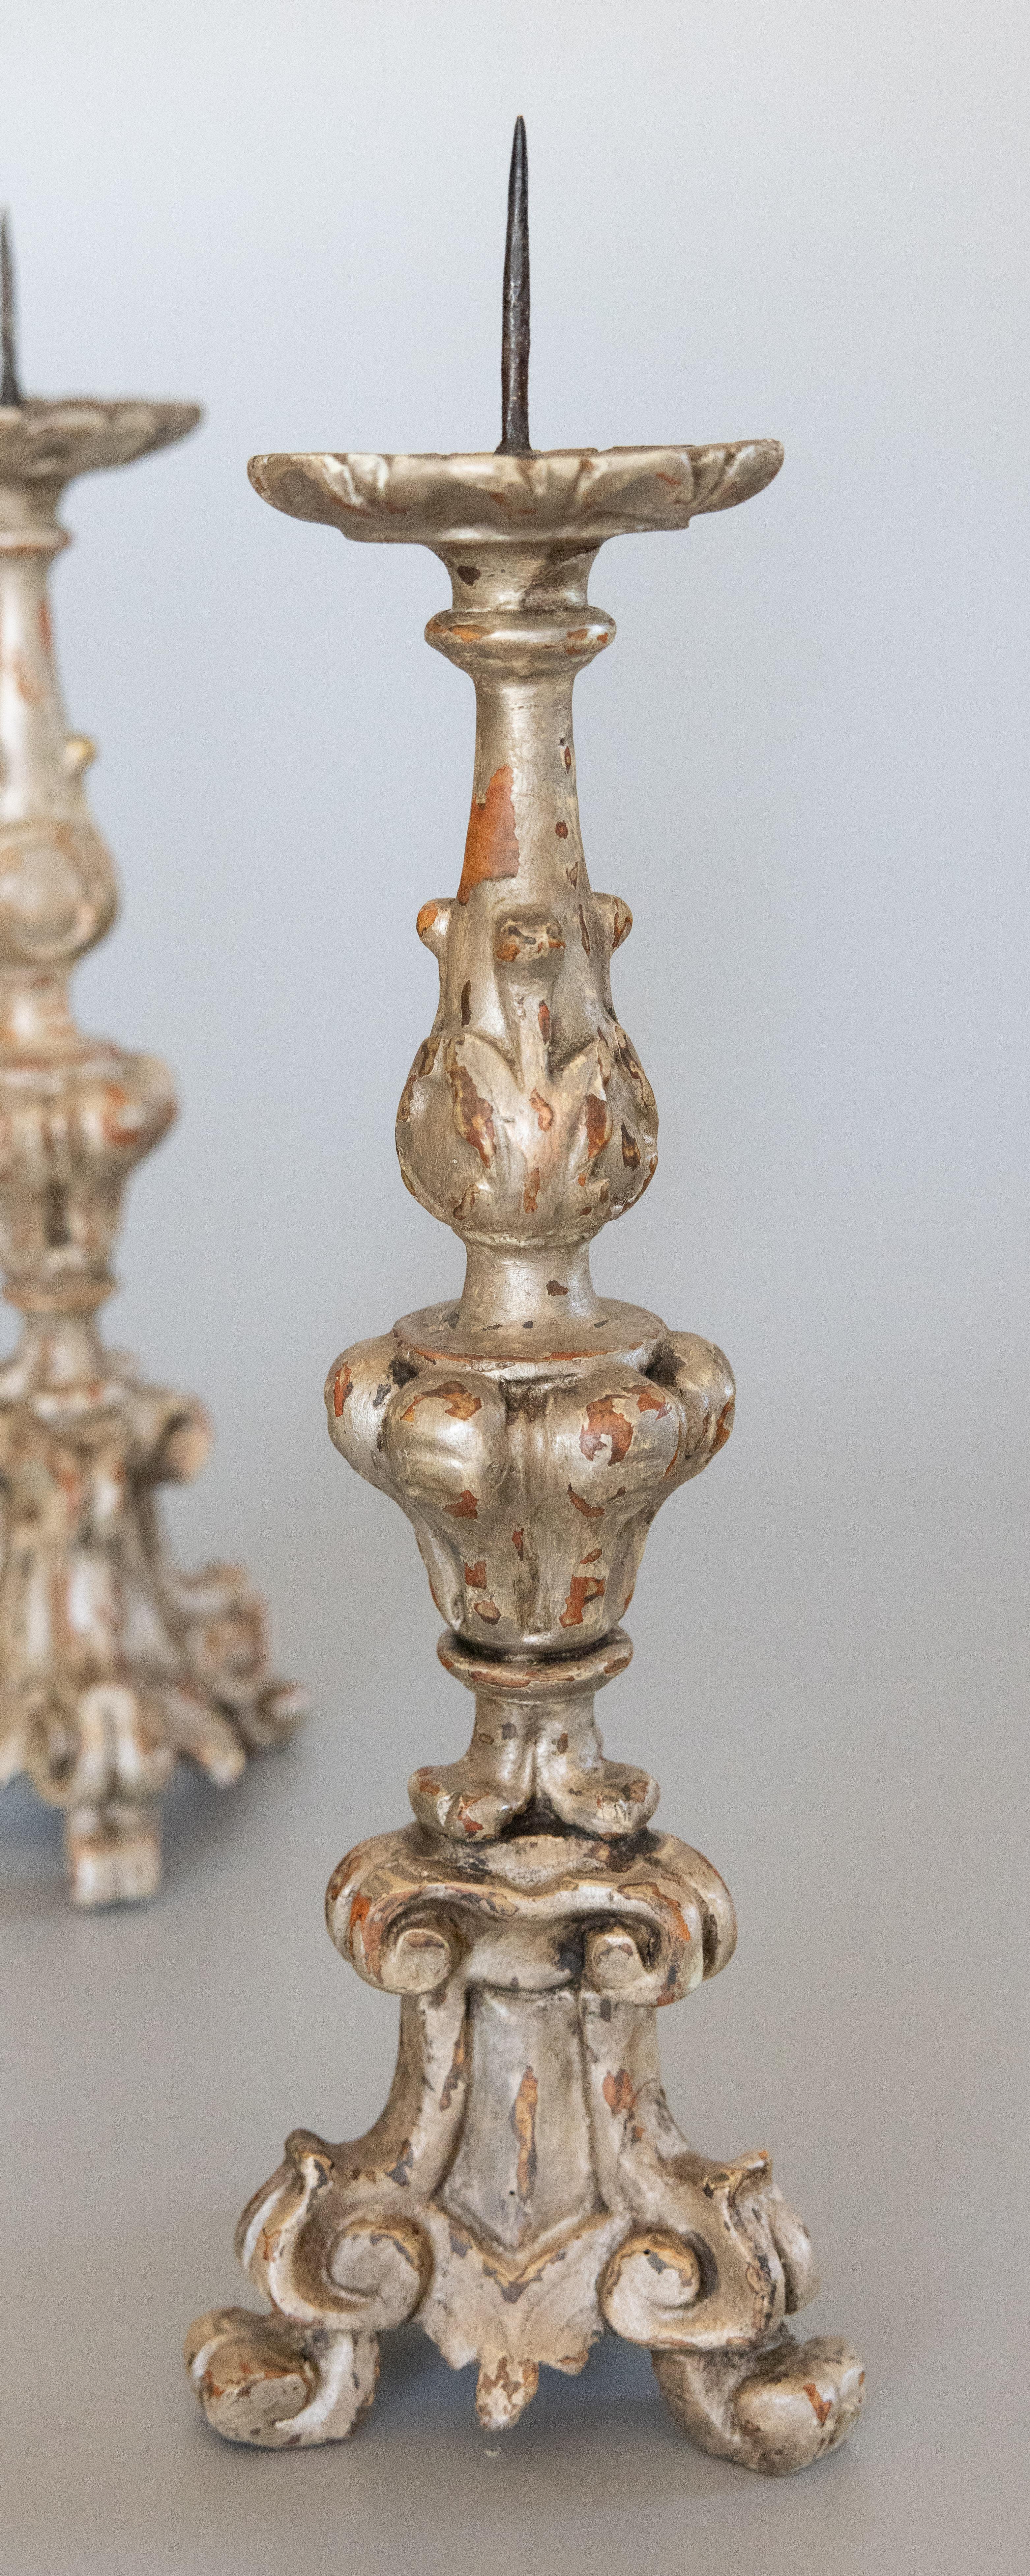 Pair of 18th Century Italian Silver Gilt Wood Pricket Candlesticks In Good Condition For Sale In Pearland, TX